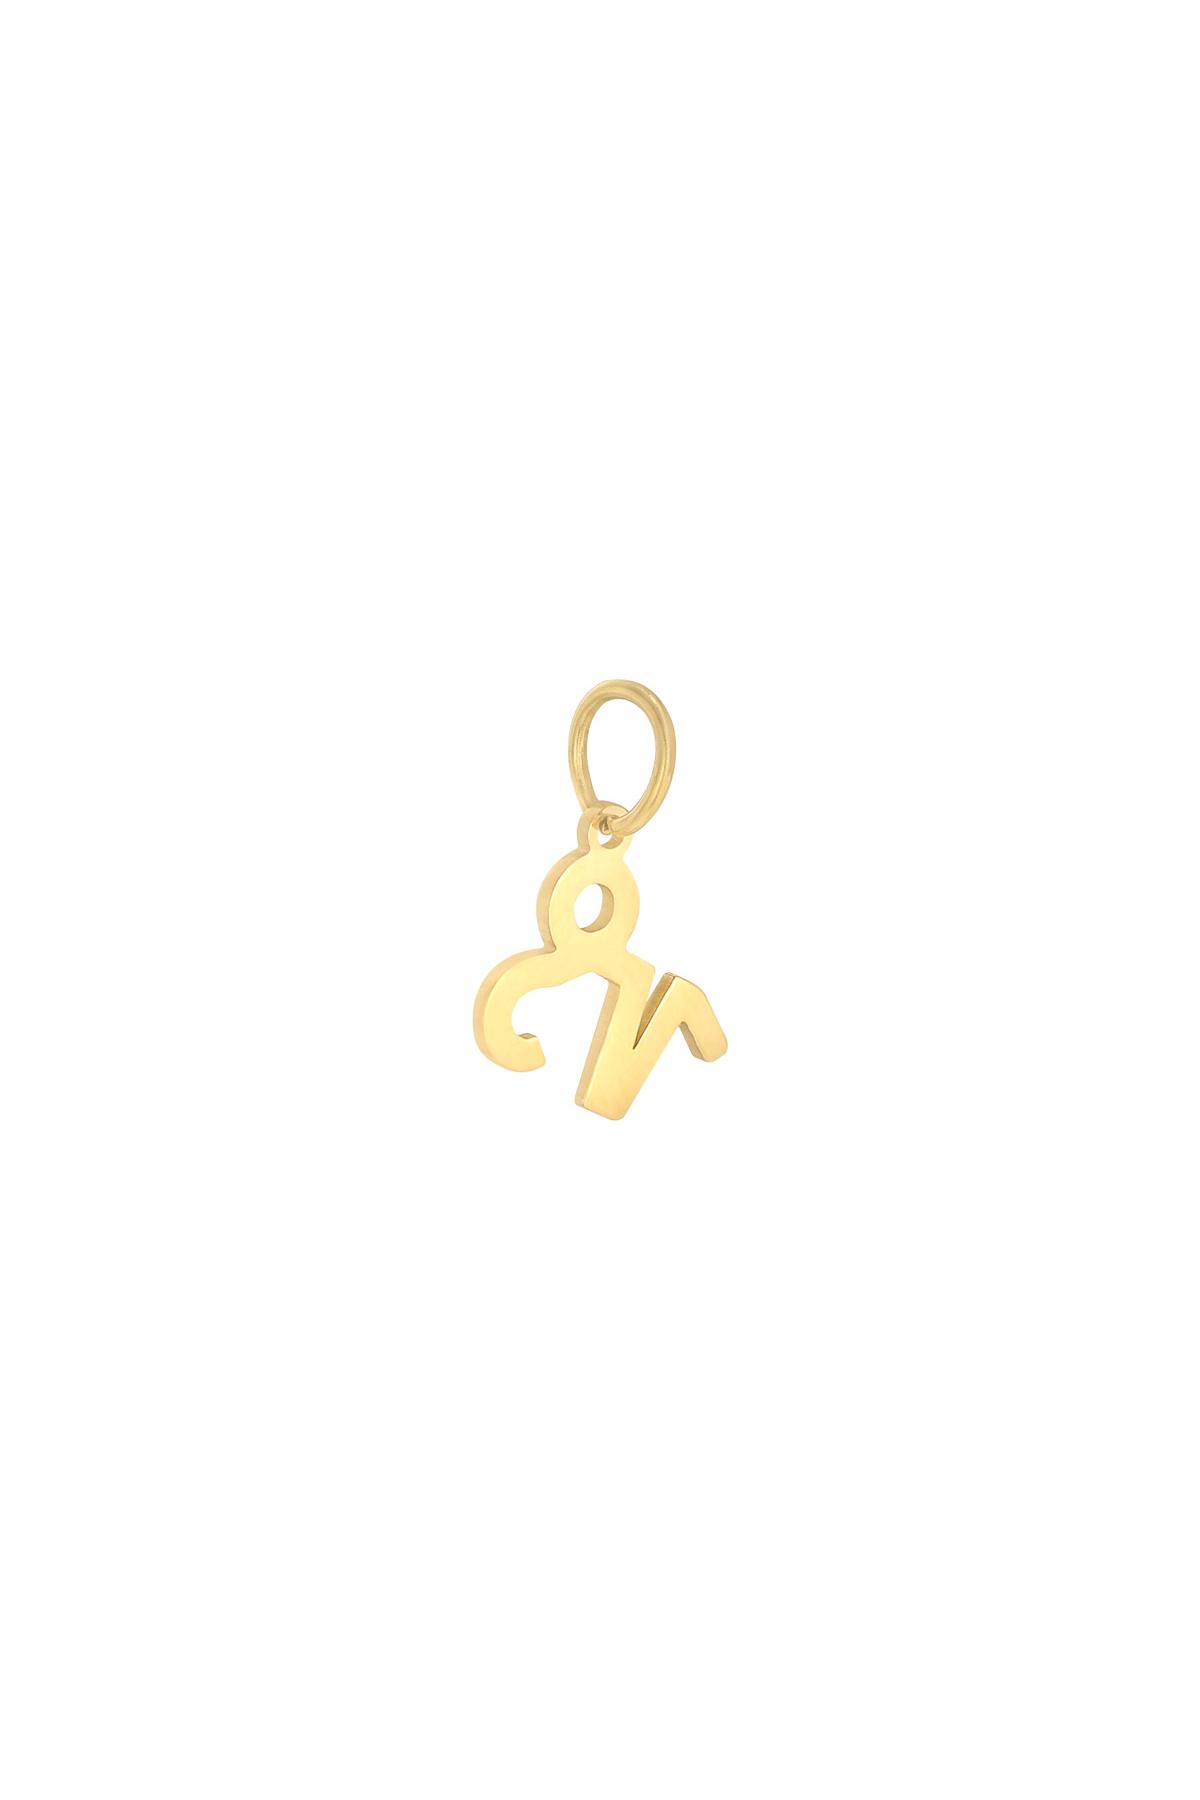 Gold / Charm Zodiac Capricorn Gold Stainless Steel Picture20